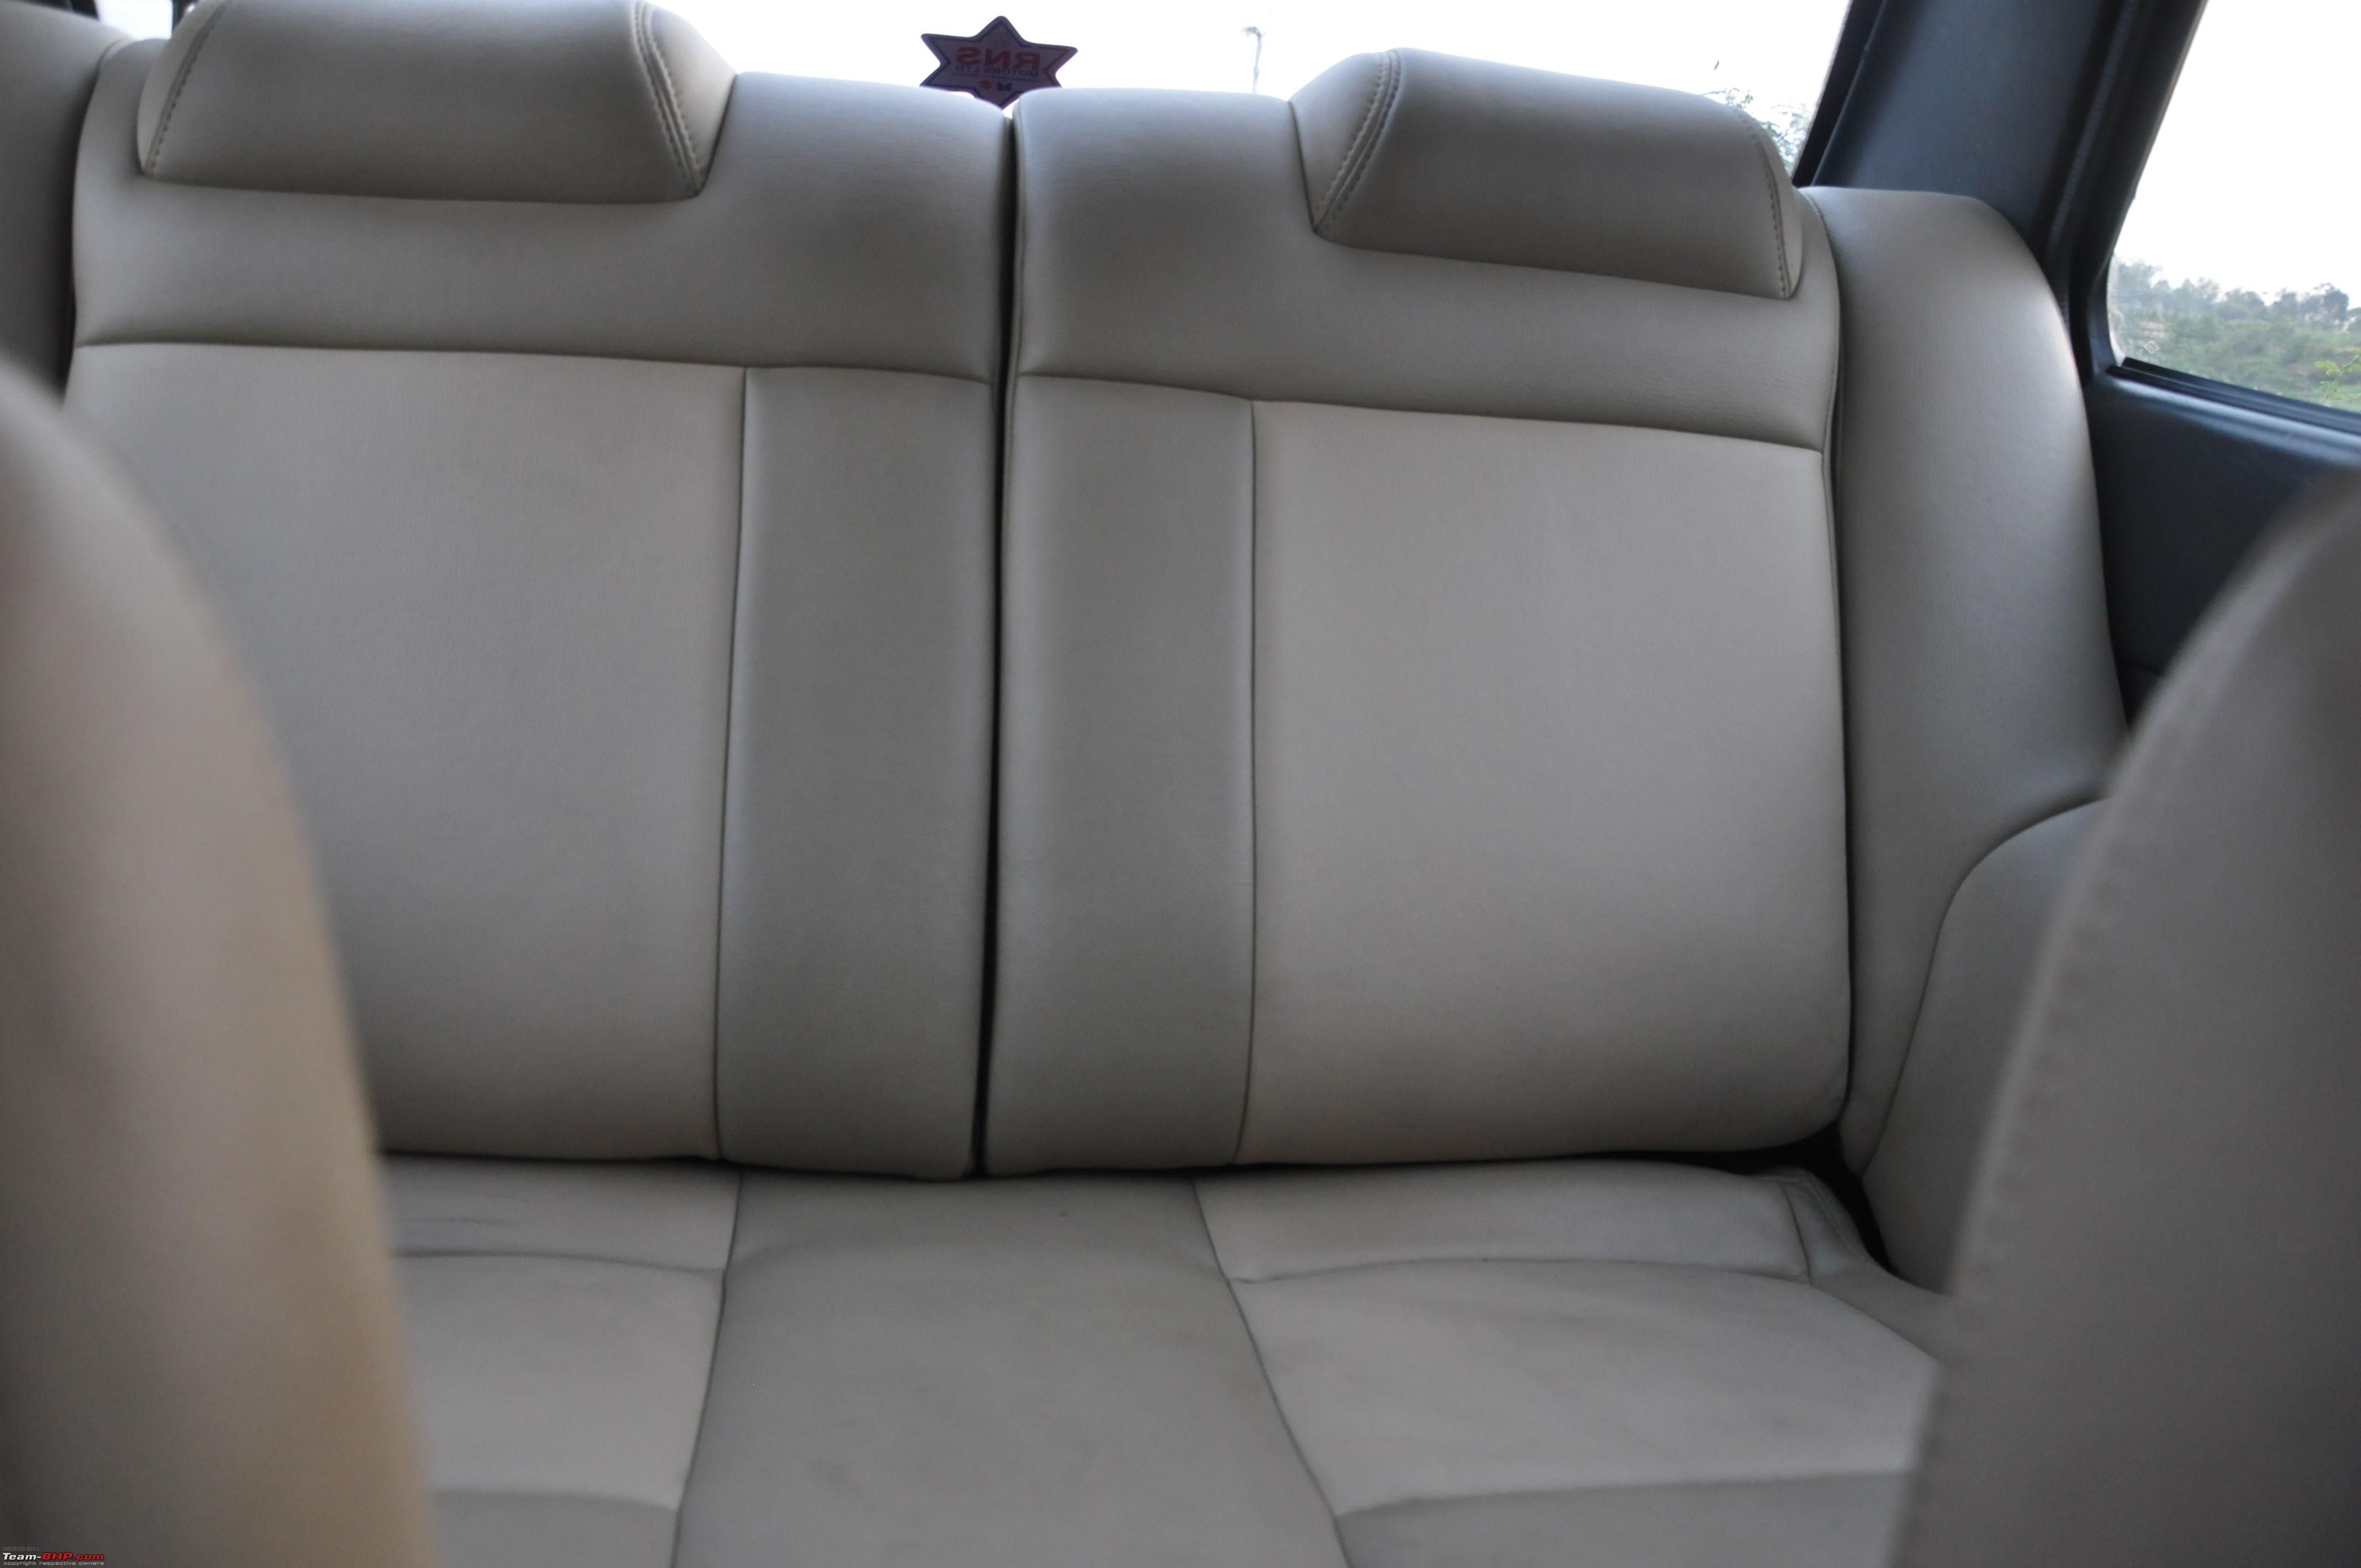 Best Car Seat Covers In Bangalore - Leather Car upholstery - Karlsson